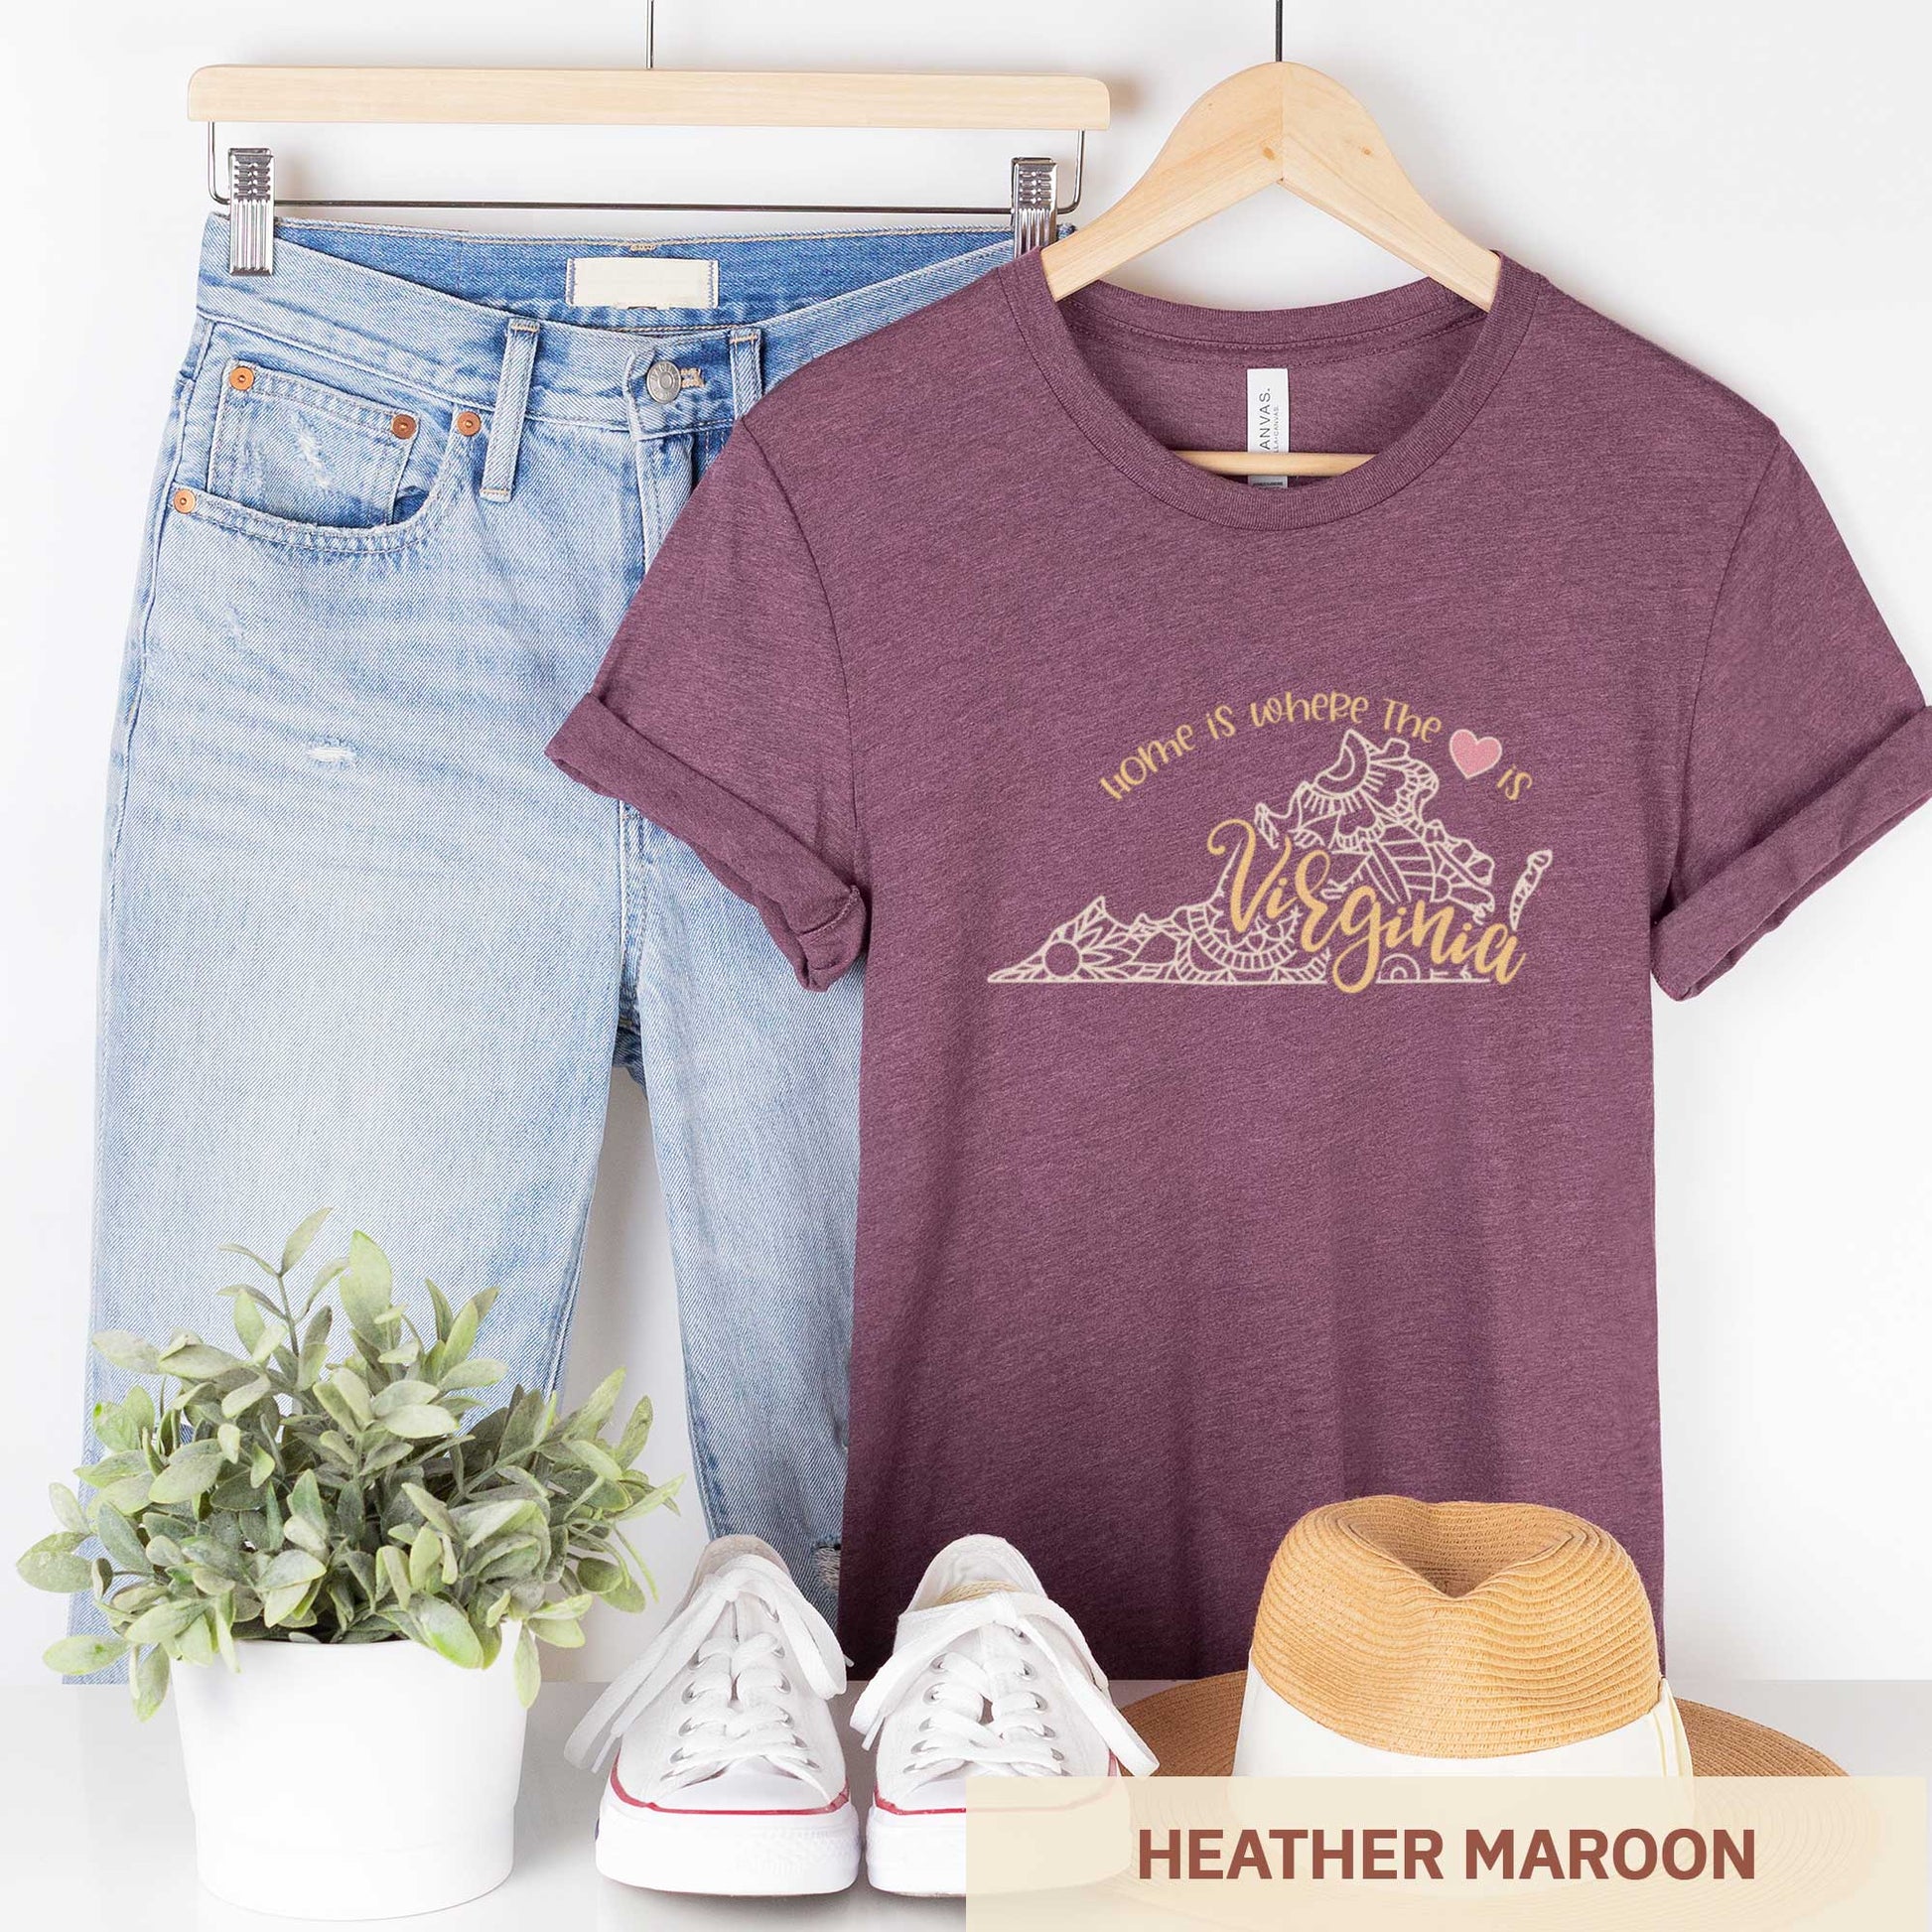 A hanging heather maroon Bella Canvas t-shirt featuring a mandala in the shape of Virginia with the words home is where the heart is.